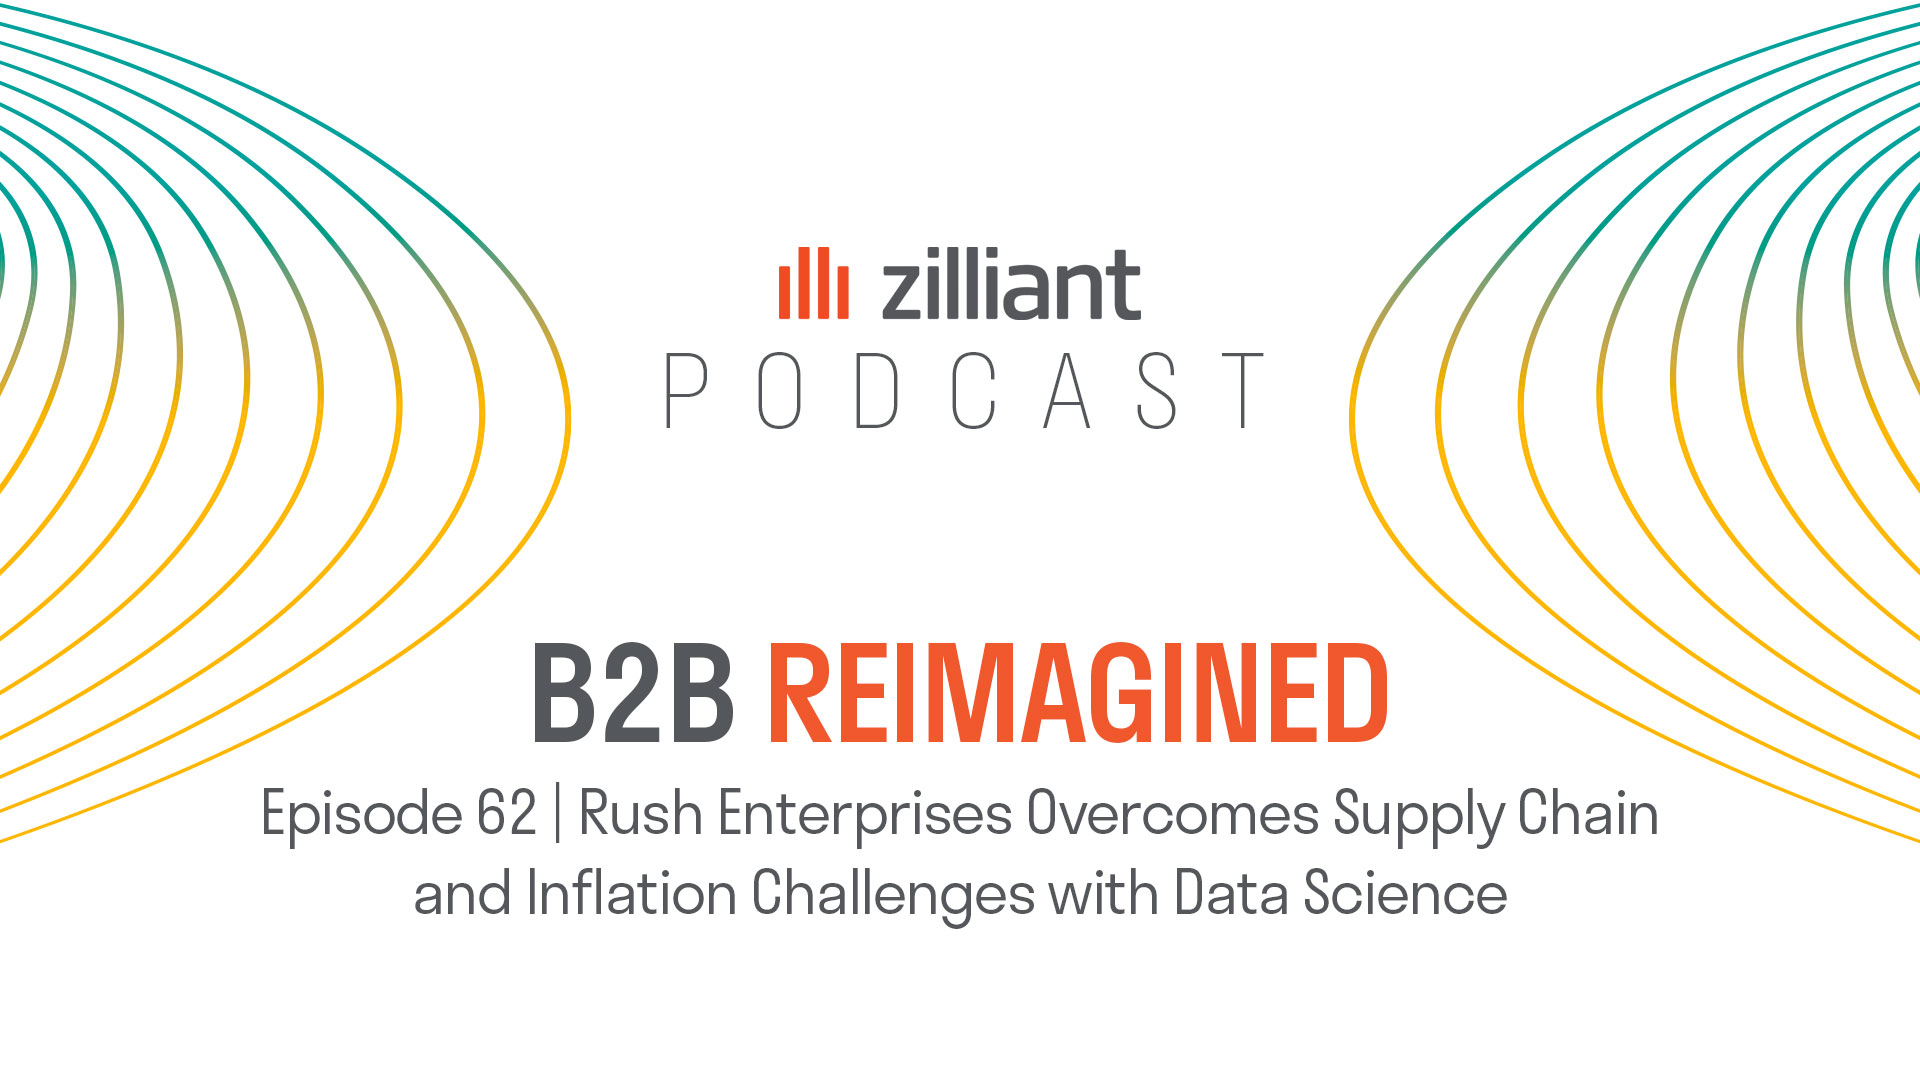 Rush Enterprises Overcomes Supply Chain and Inflation Challenges with Data Science